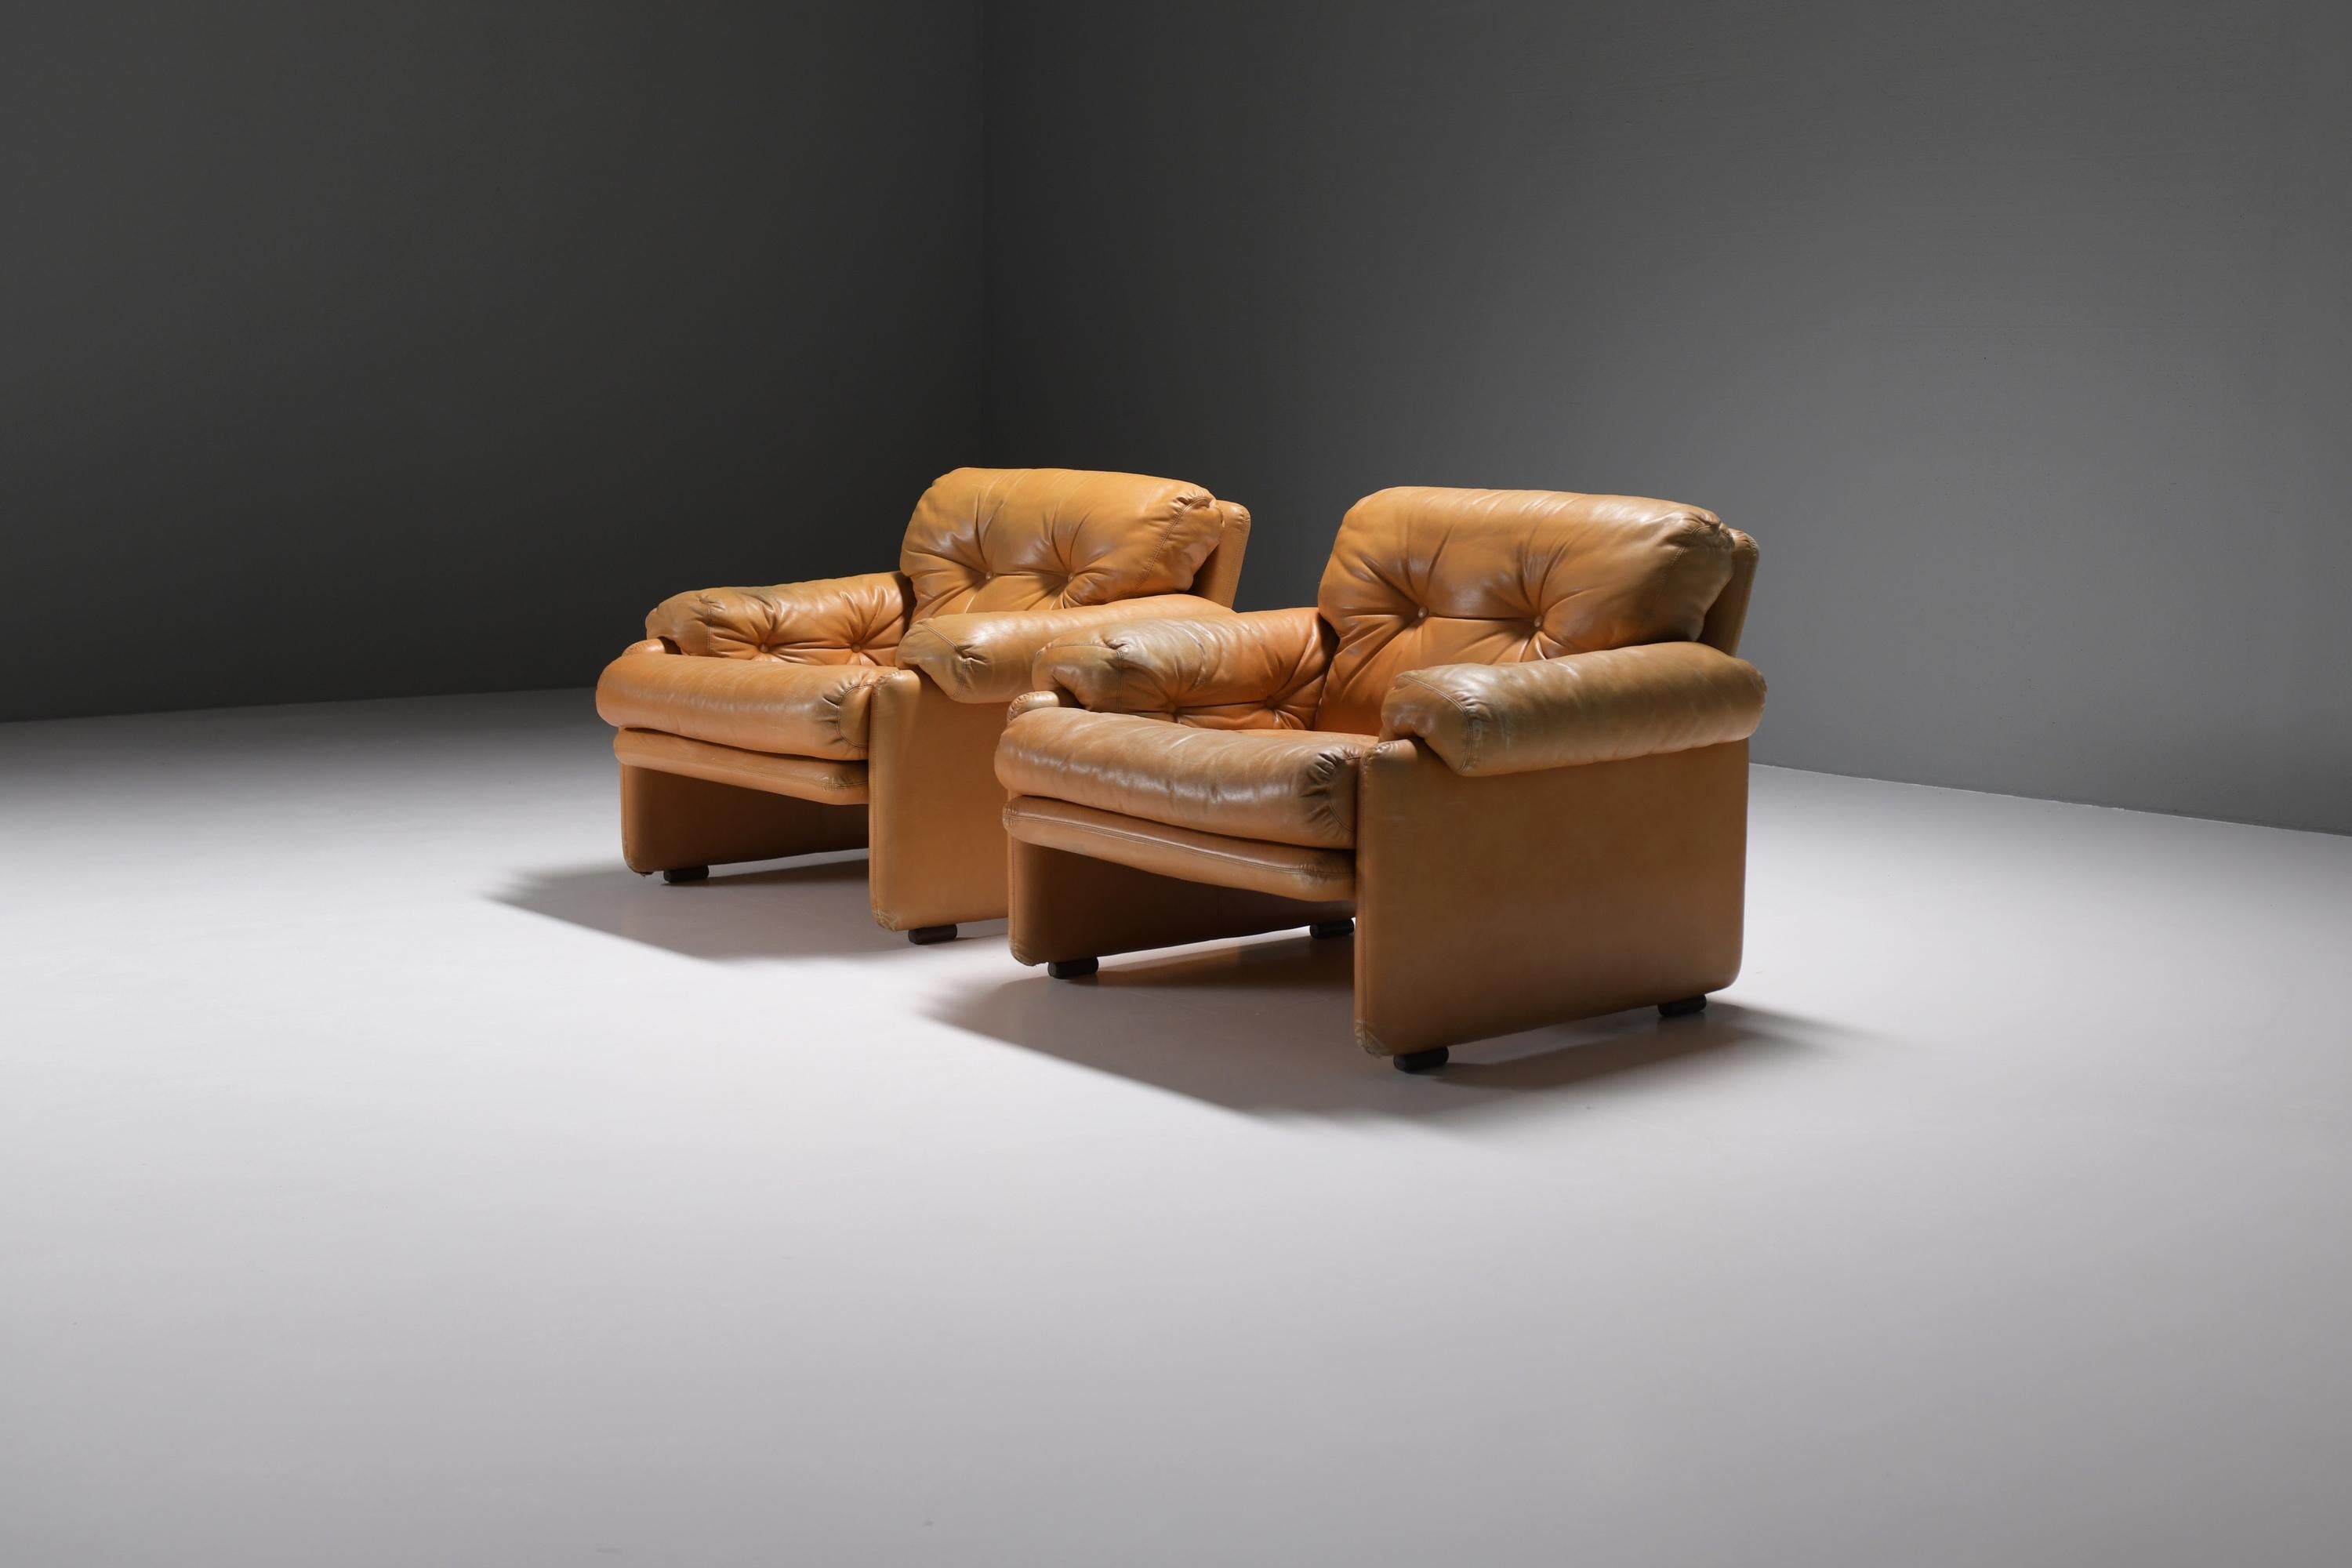 Stunning & matching Coronado set in its original cognac leather.  Perfect patina! 
Designed by Afra & Tobia Scarpa for B&B Italia.

The 'Coronado' lounge chair is designed by Afra & Tobia Scarpa. The seat has a soft line and a voluminous look. The